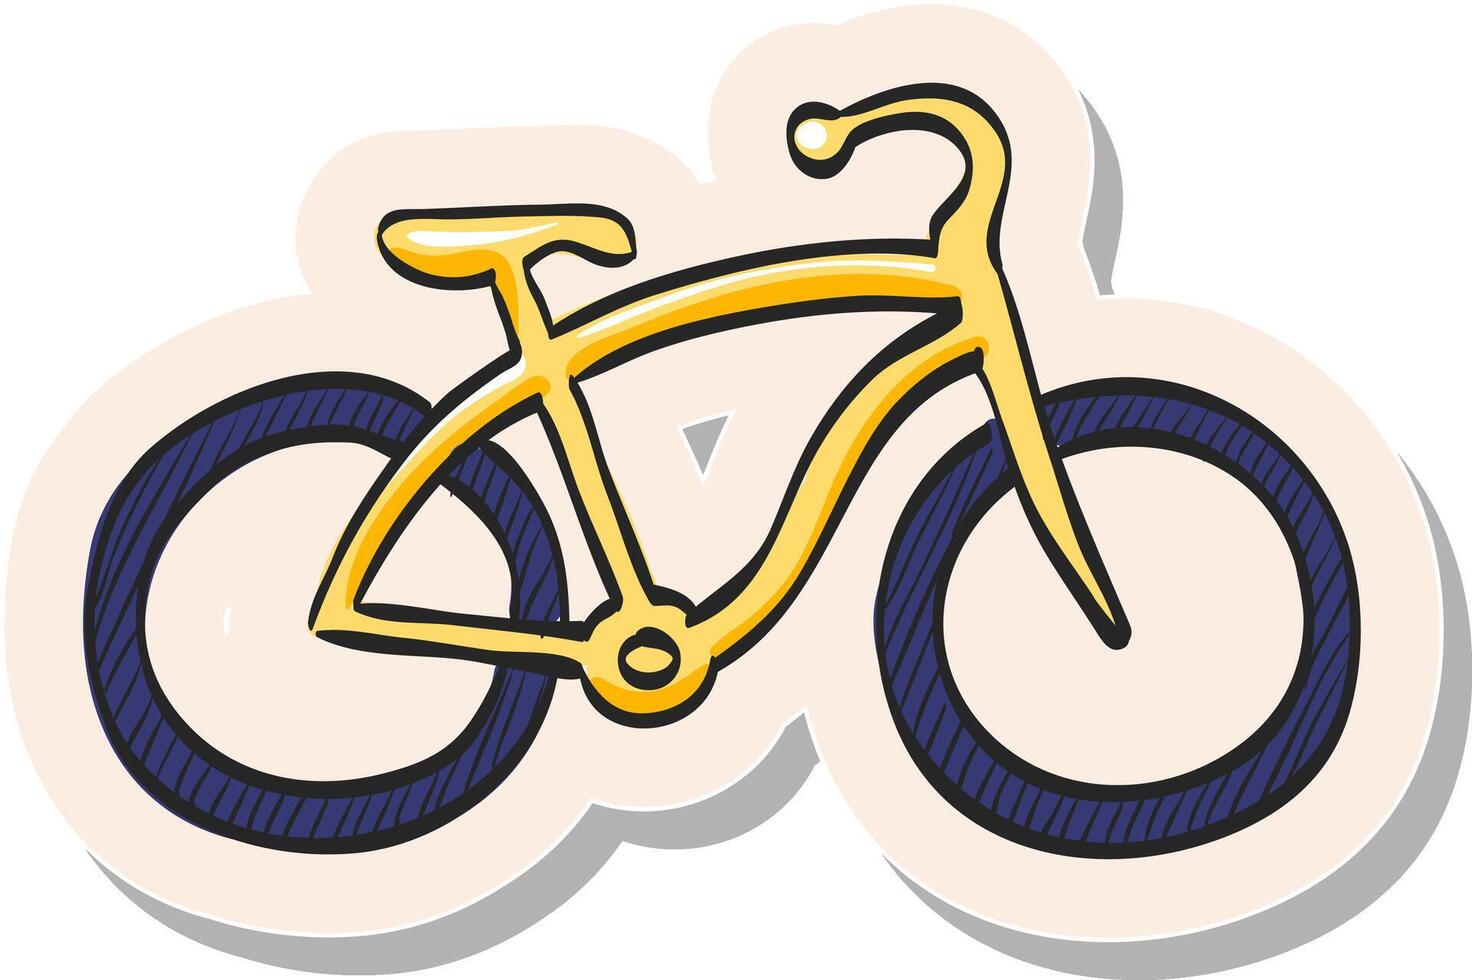 Hand drawn Low rider bicycle icon in sticker style vector illustration